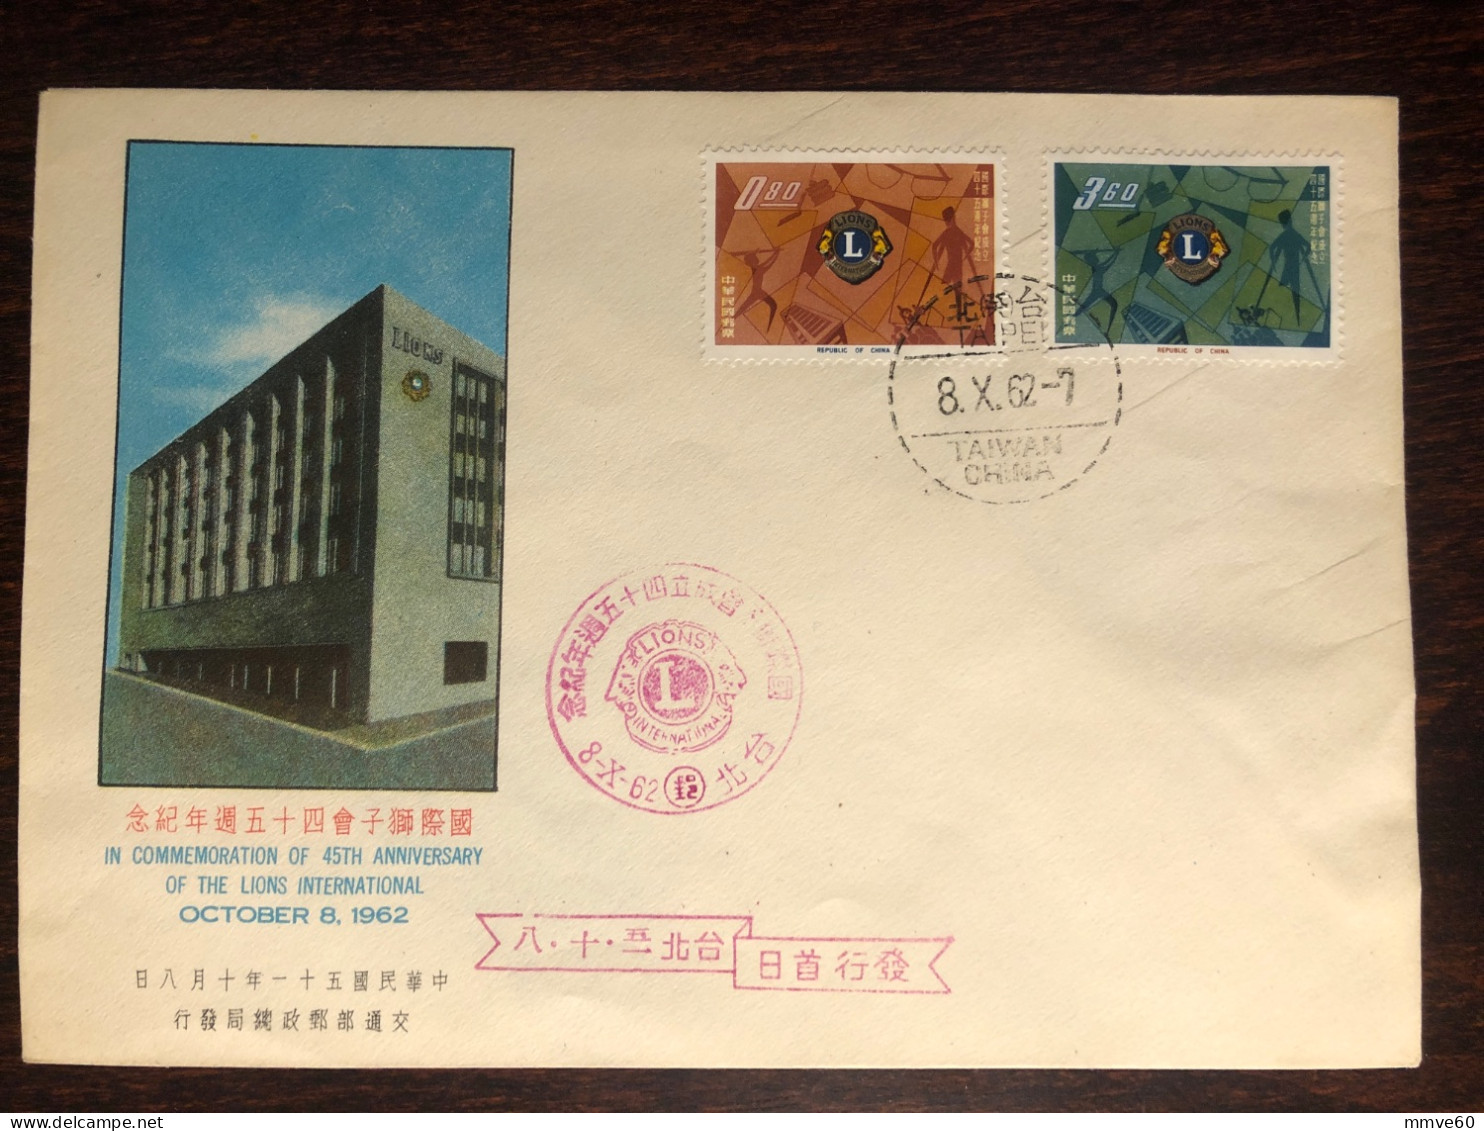 CHINA TAIWAN ROC FDC COVER 1962 YEAR LIONS HEALTH MEDICINE STAMPA - Covers & Documents